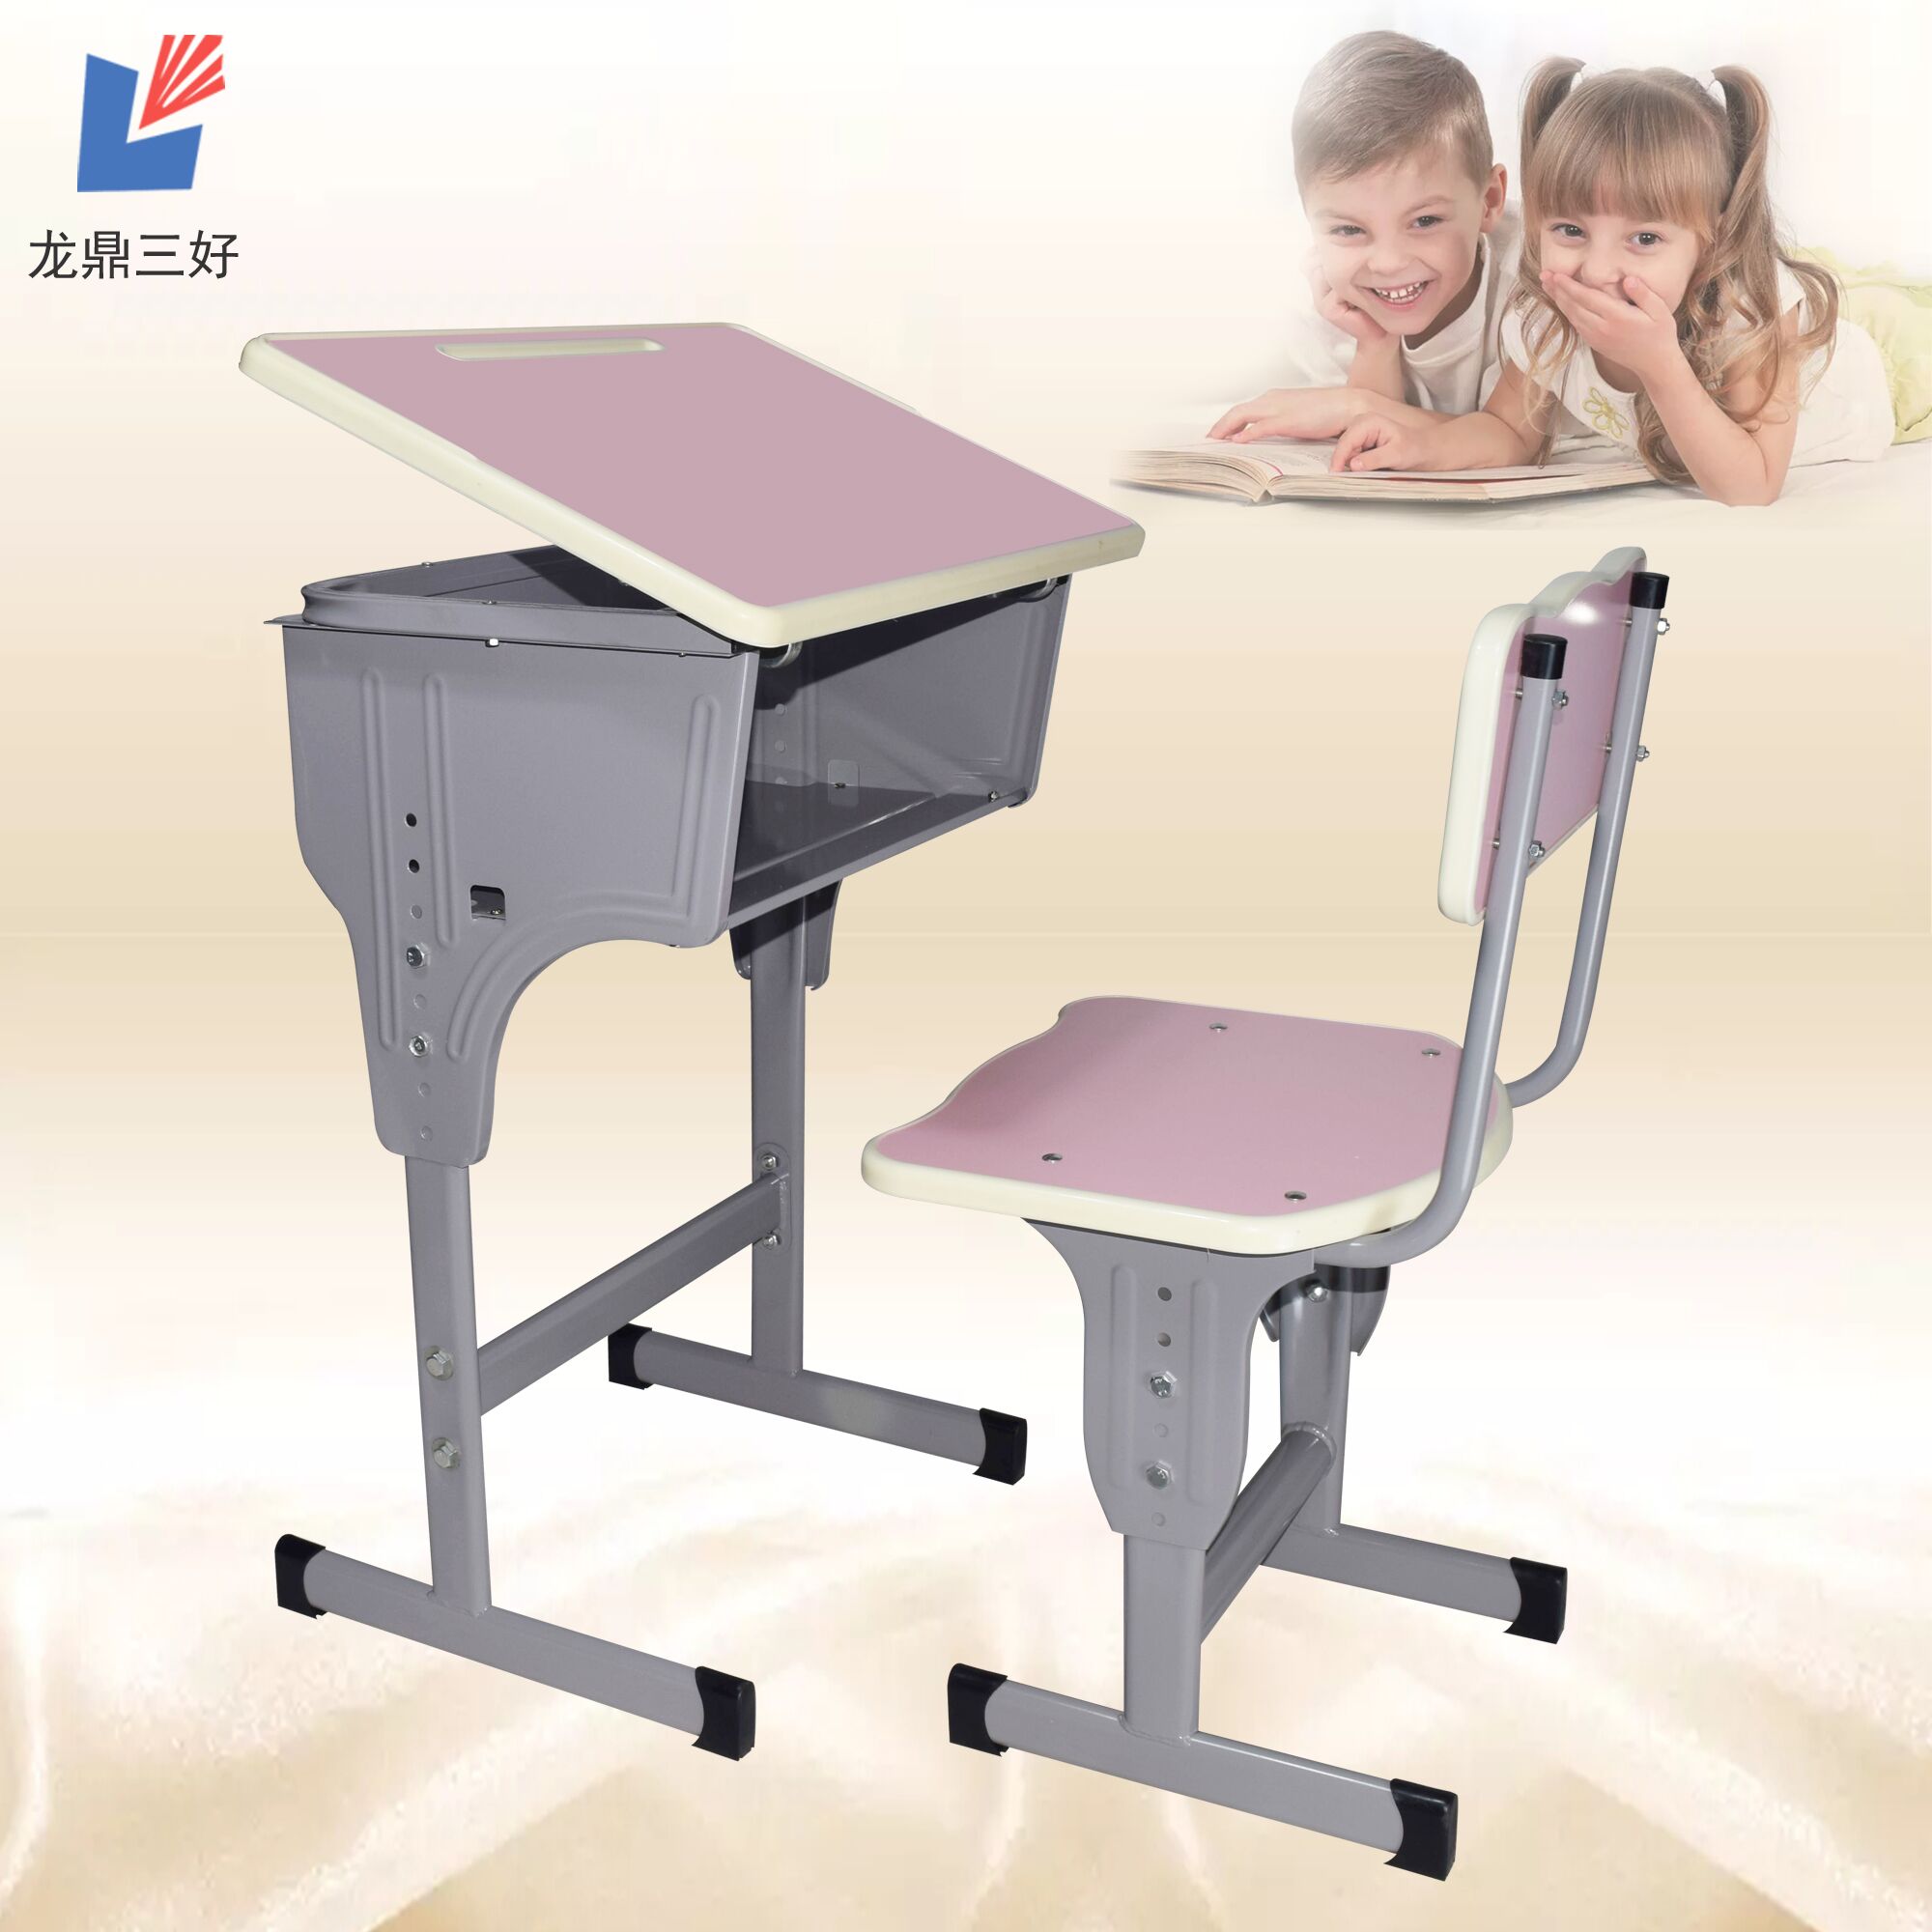 Factory direct sales single student learning and training art art desktop adjustable lift multi-functional desk and chair